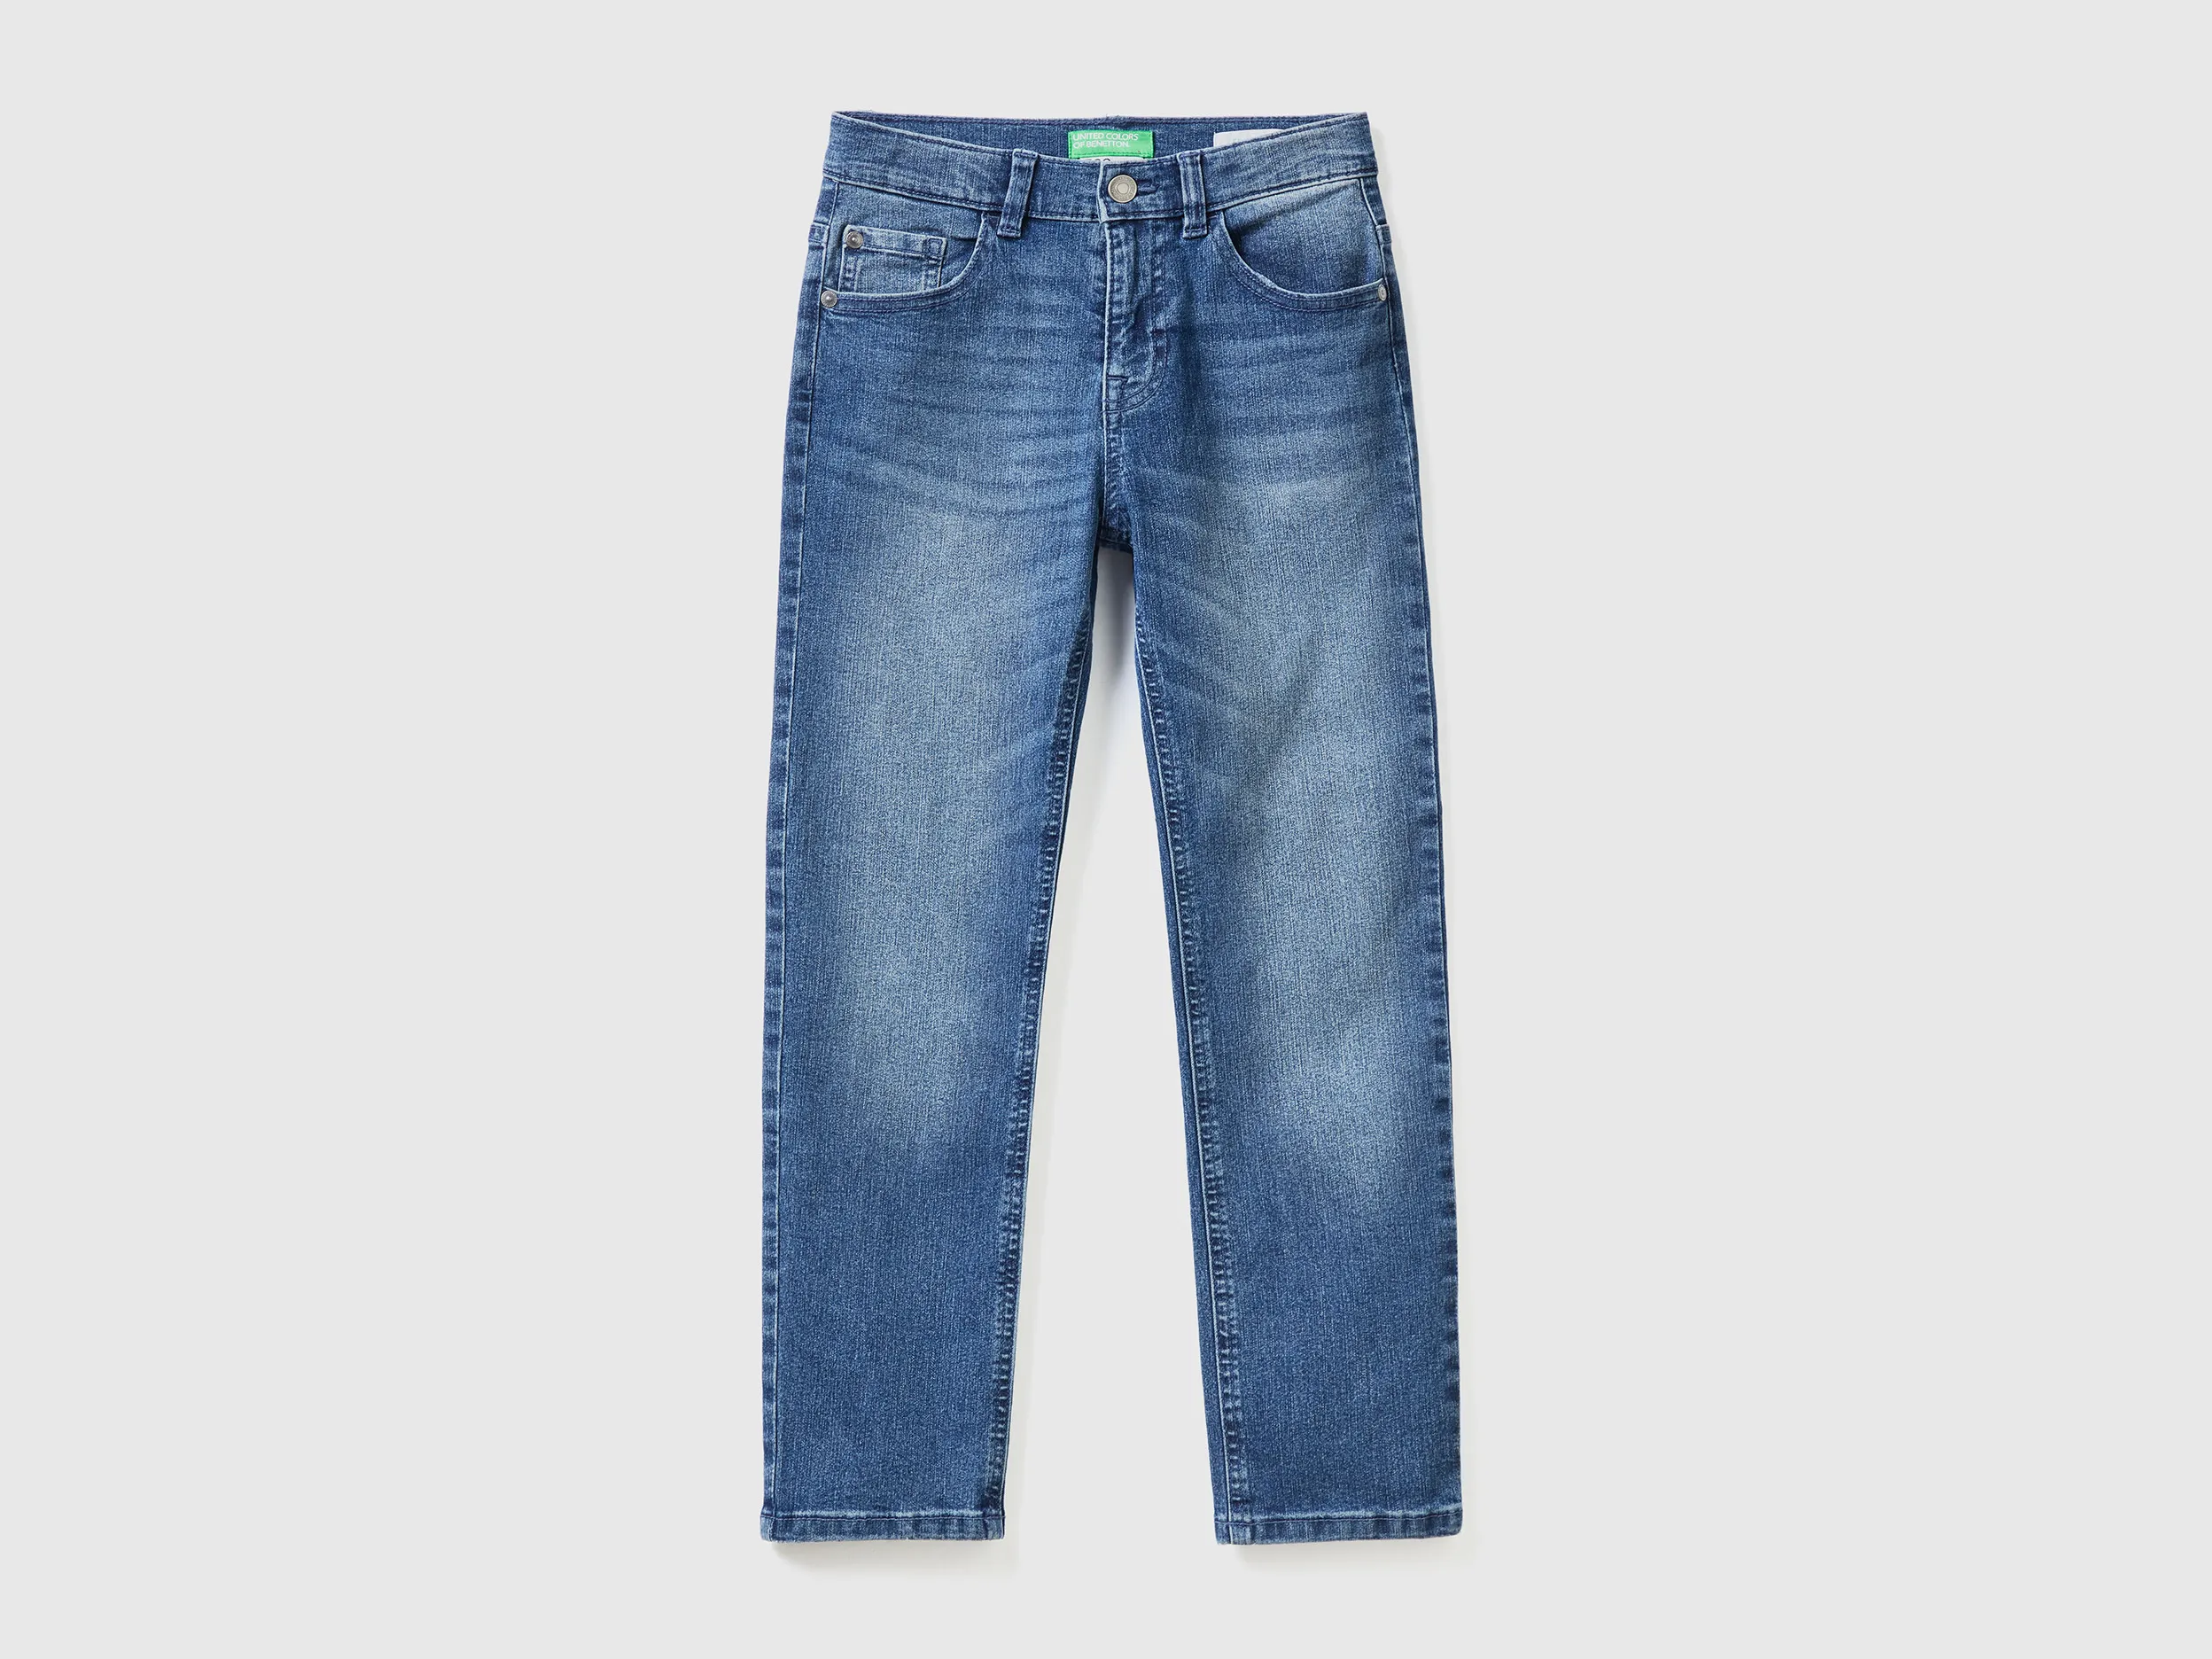 Benetton, Jeans Slim Fit "eco-recycle", Blu Scuro, Bambini